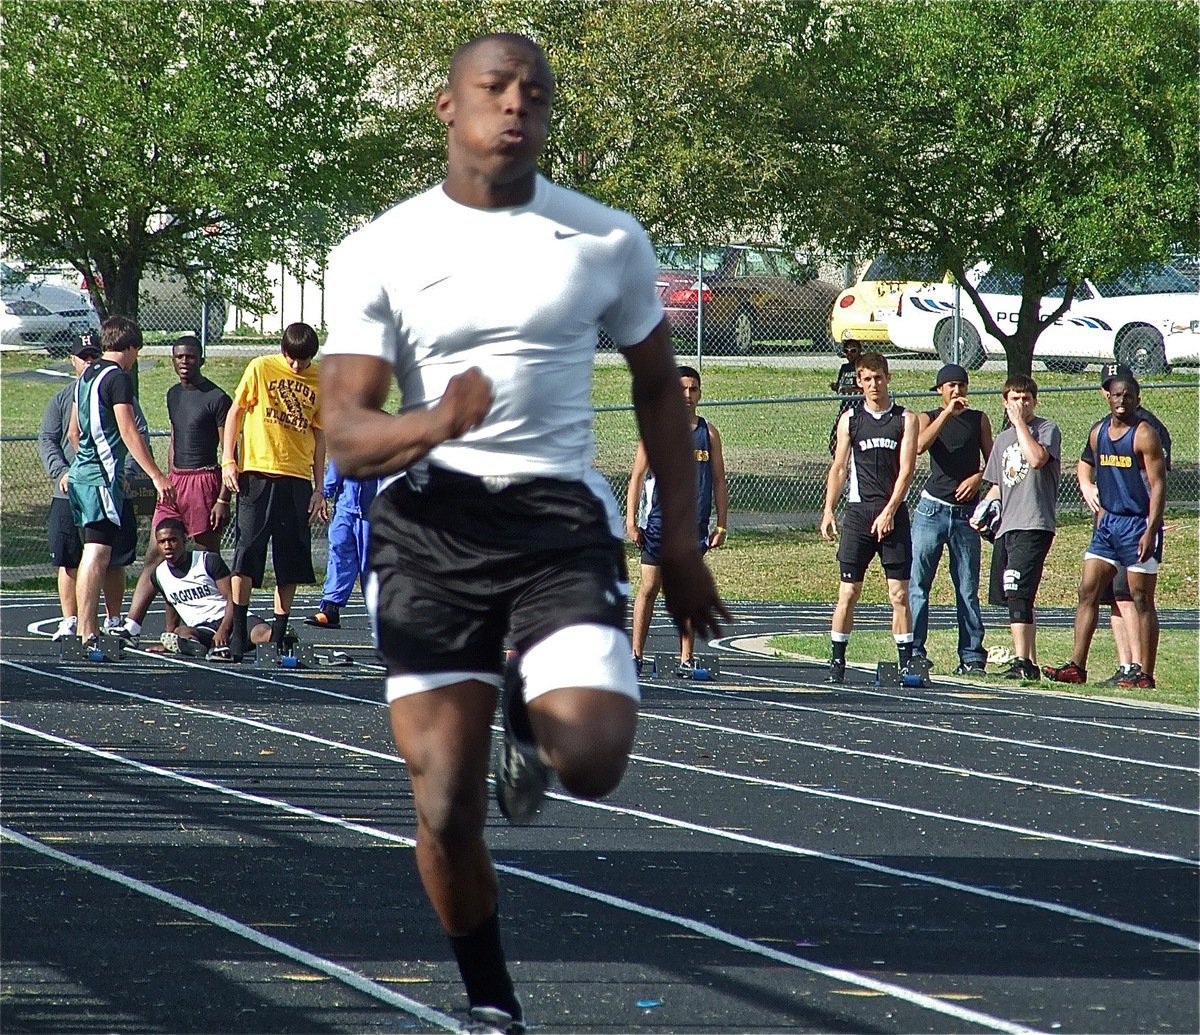 Image: Desmond dashes — Desmond Anderson keeps running all the way to Area.